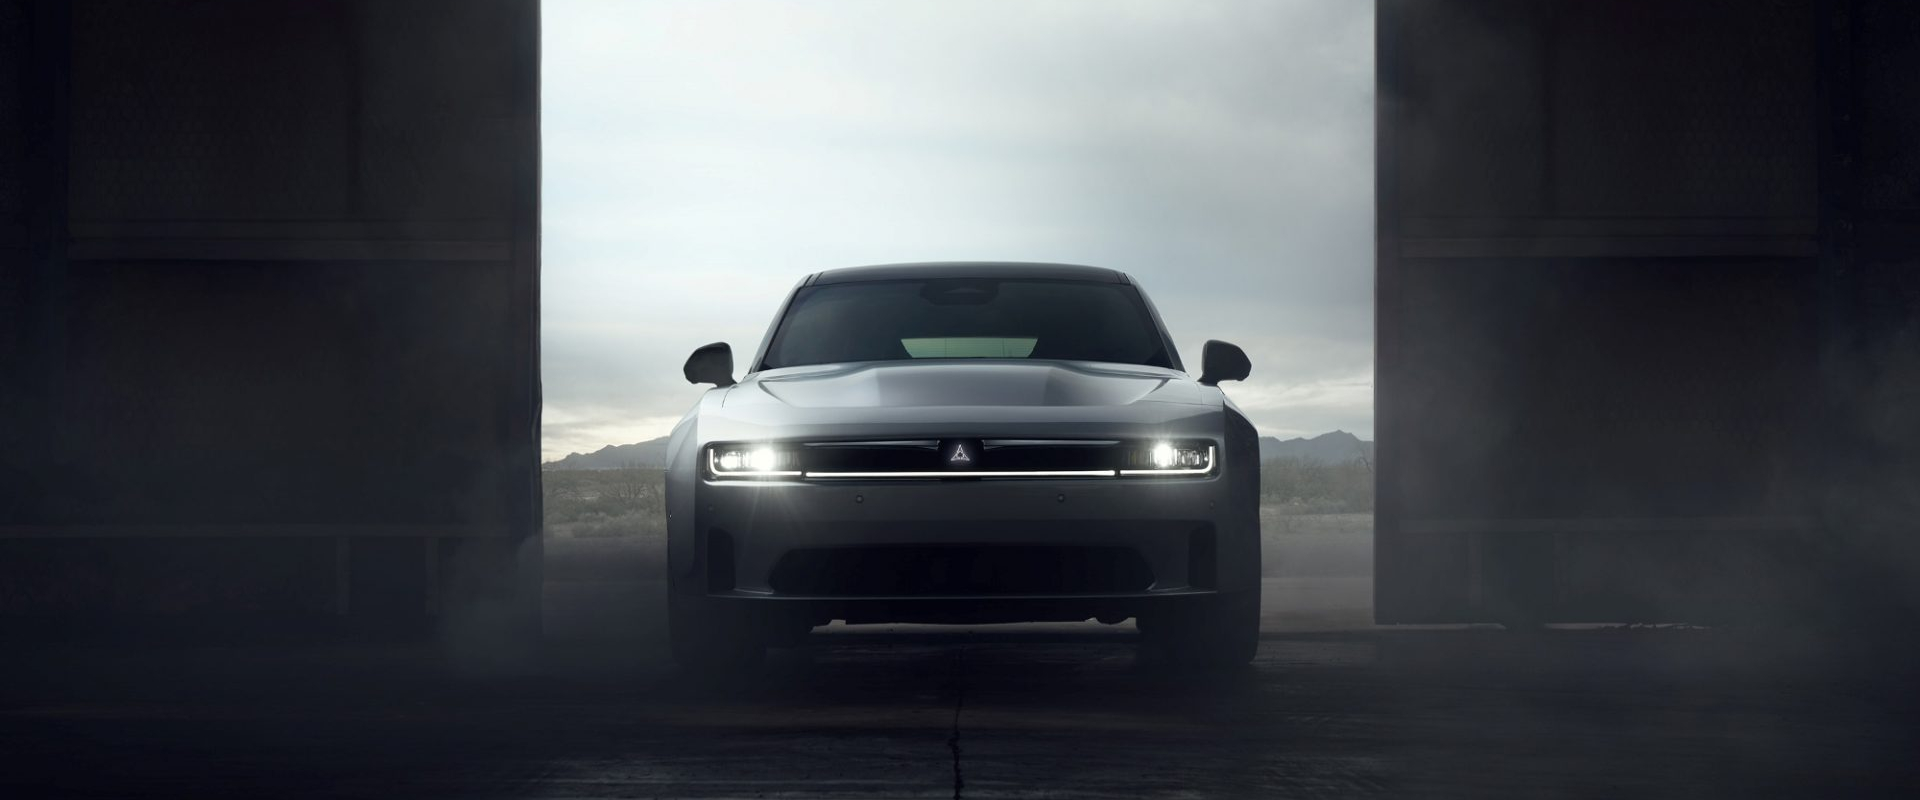 Dodge Charger Returns; EV and ICE, Two- and Four-Door Models